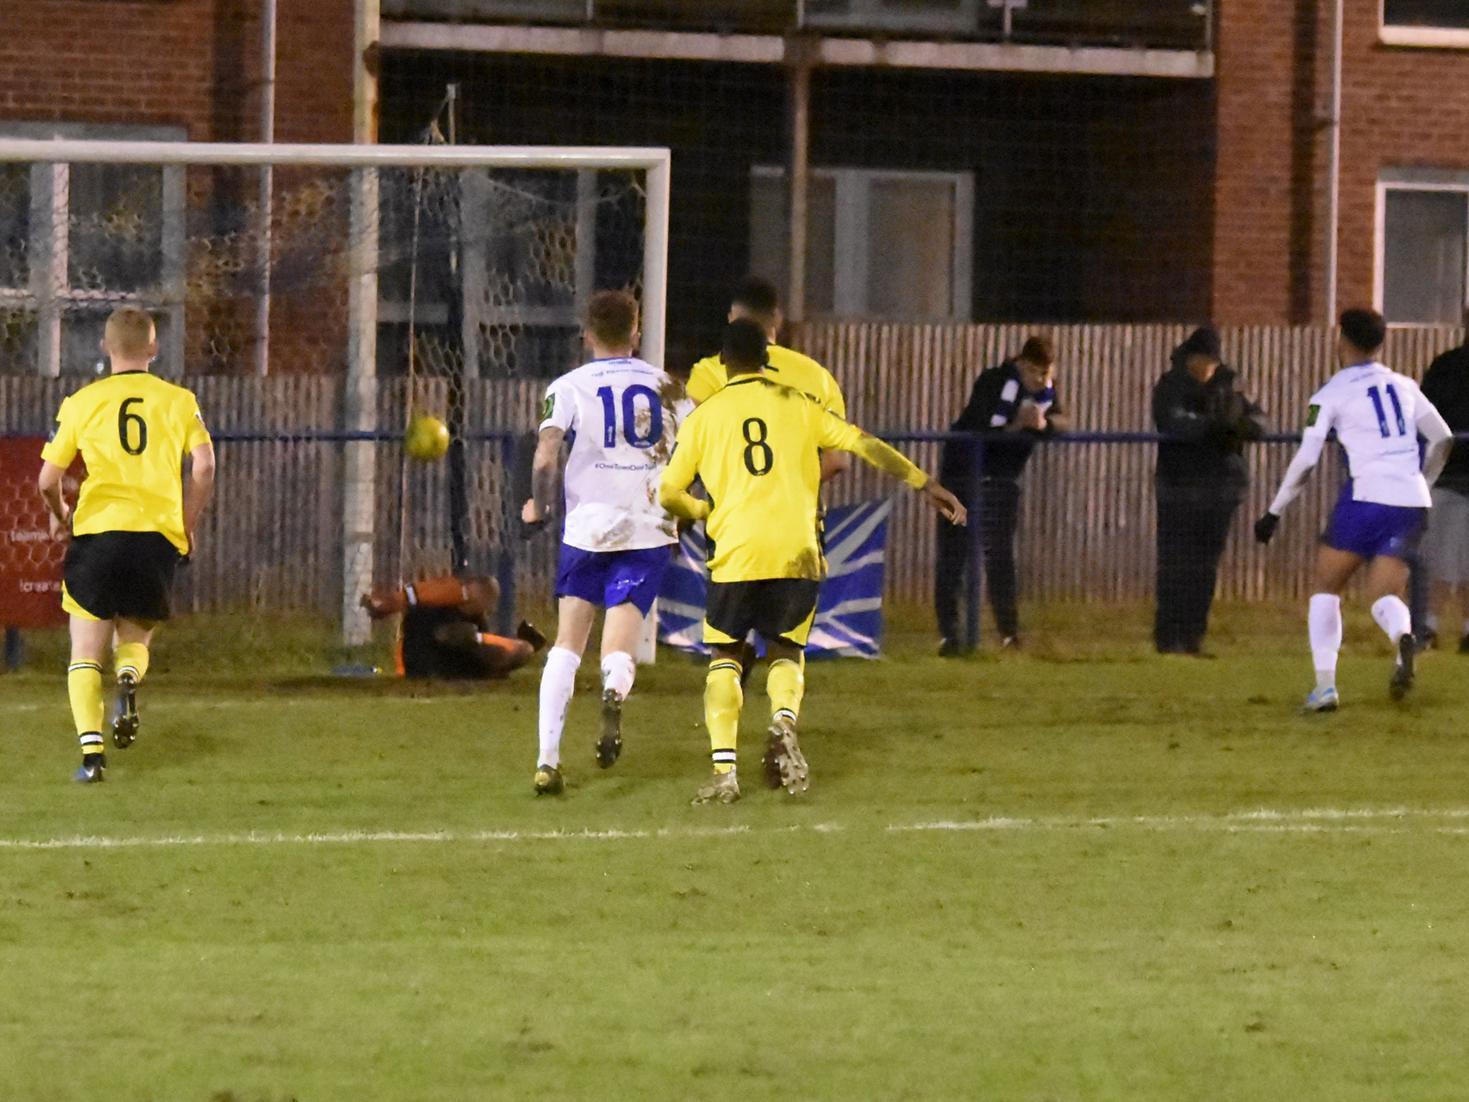 Nico Cotton's penalty kick hits the back of the net.